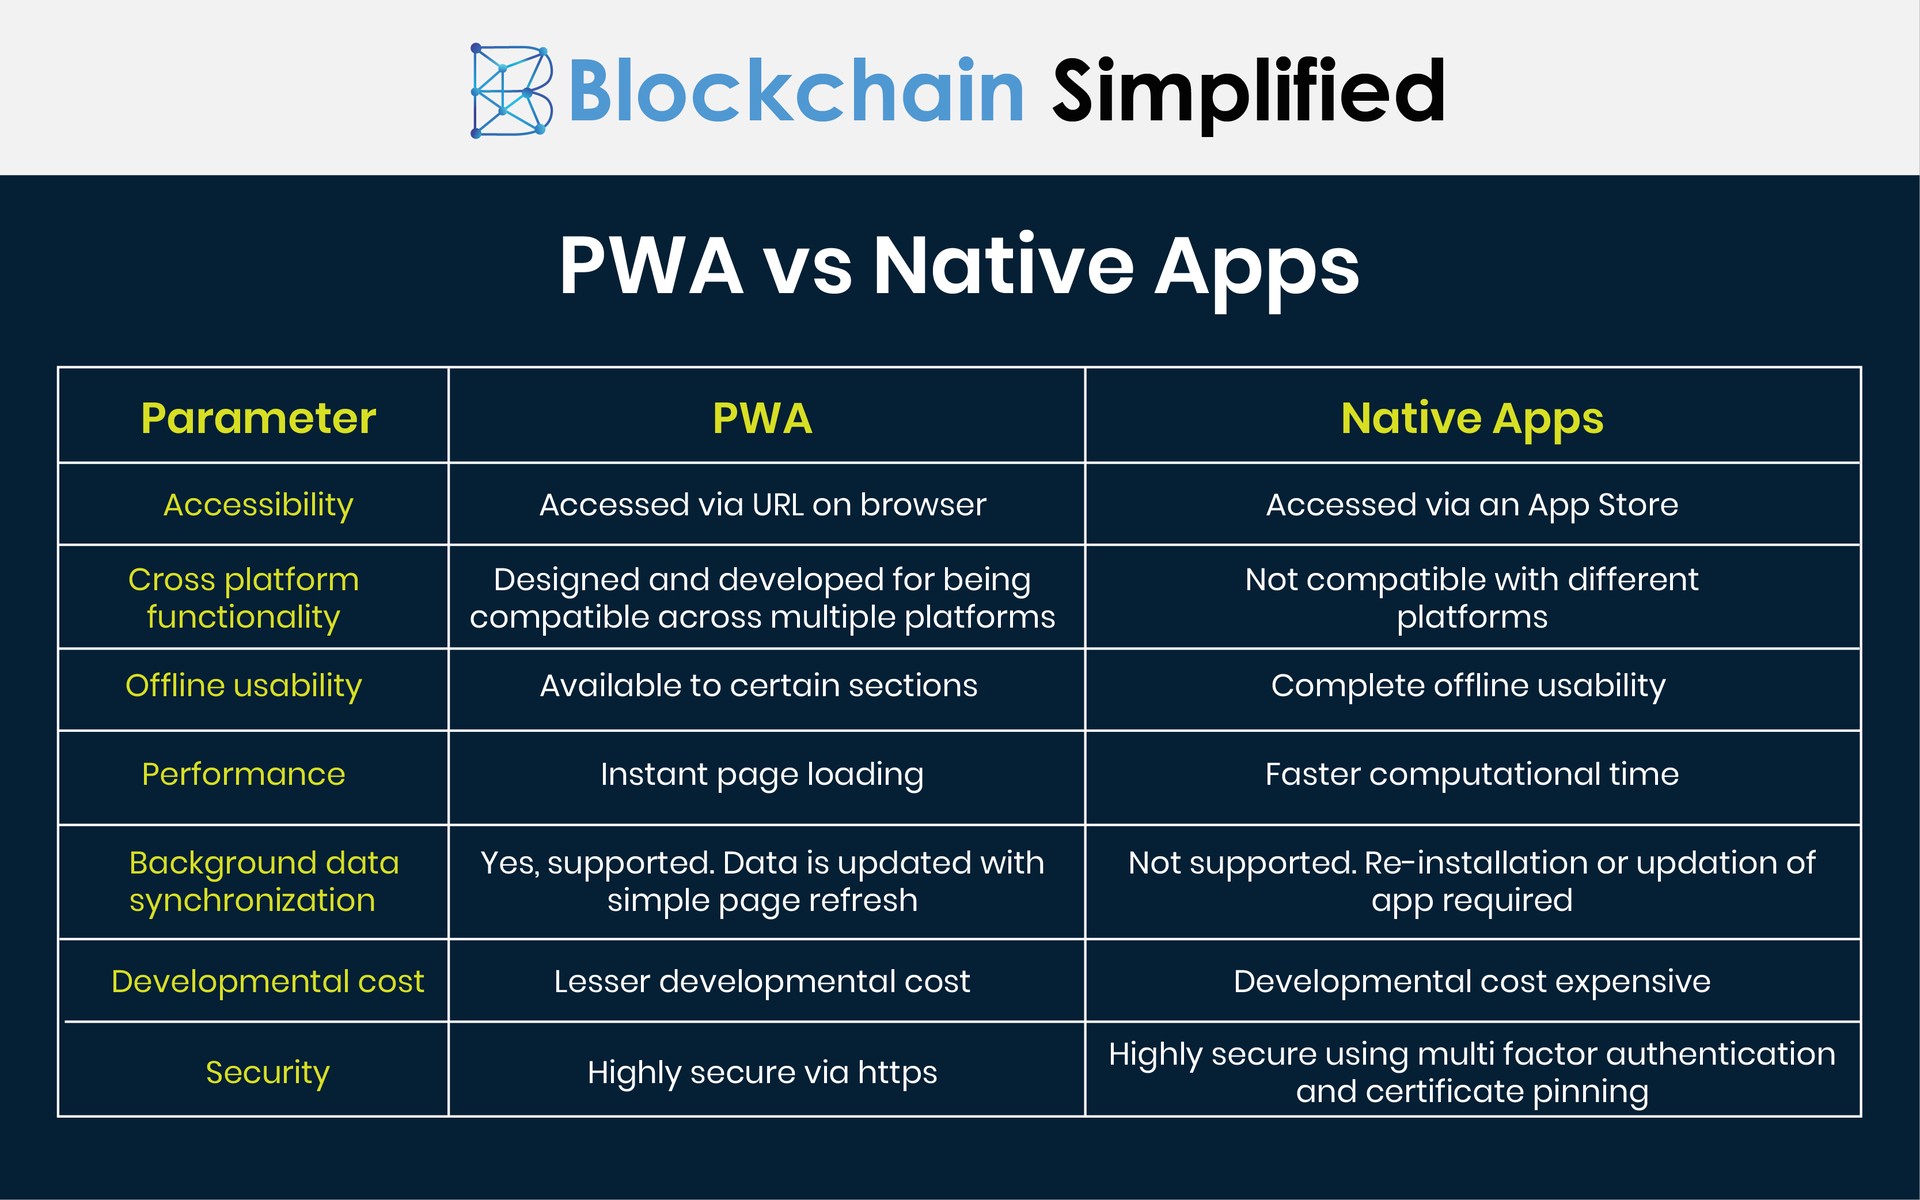 PWA vs Native Apps Battle of the Bests Blockchain Simplified